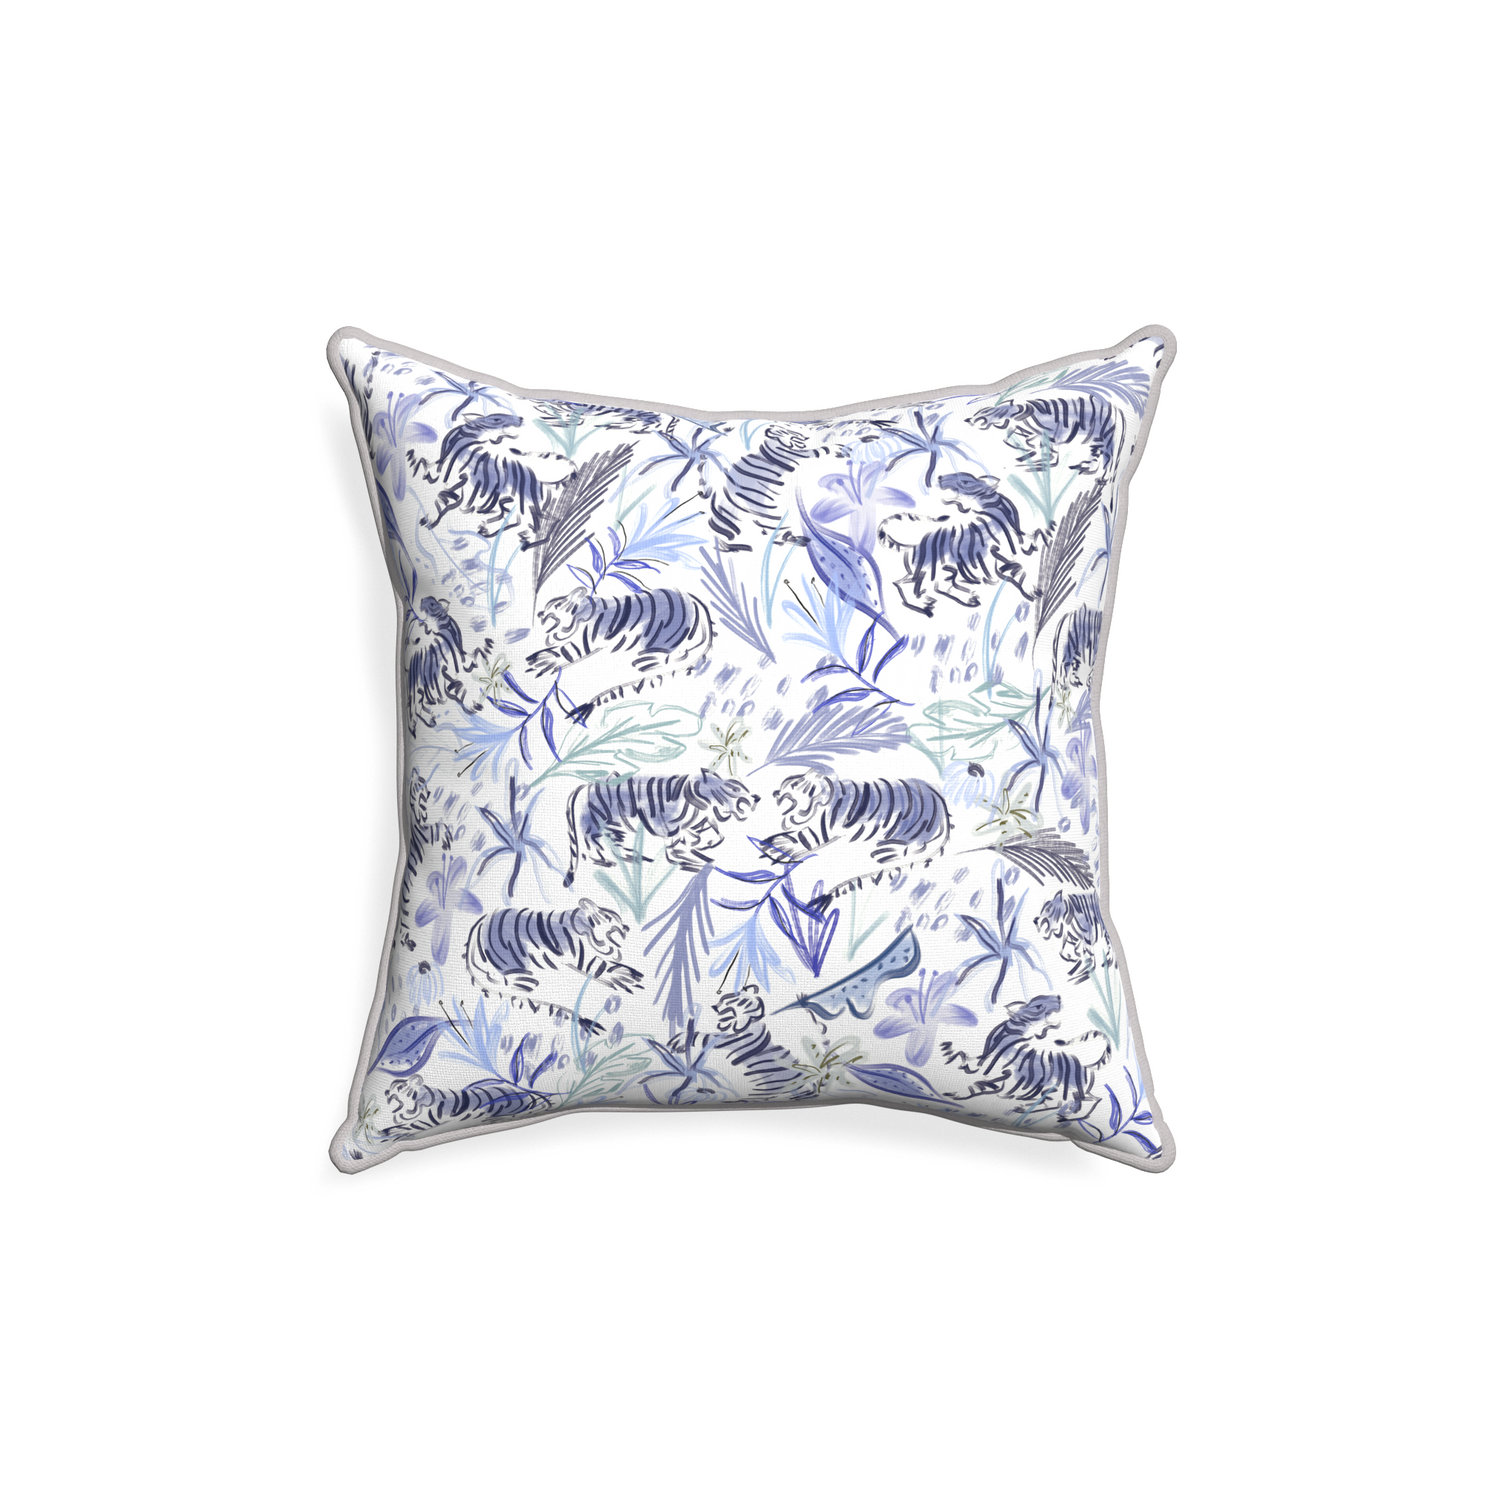 18-square frida blue custom blue with intricate tiger designpillow with pebble piping on white background